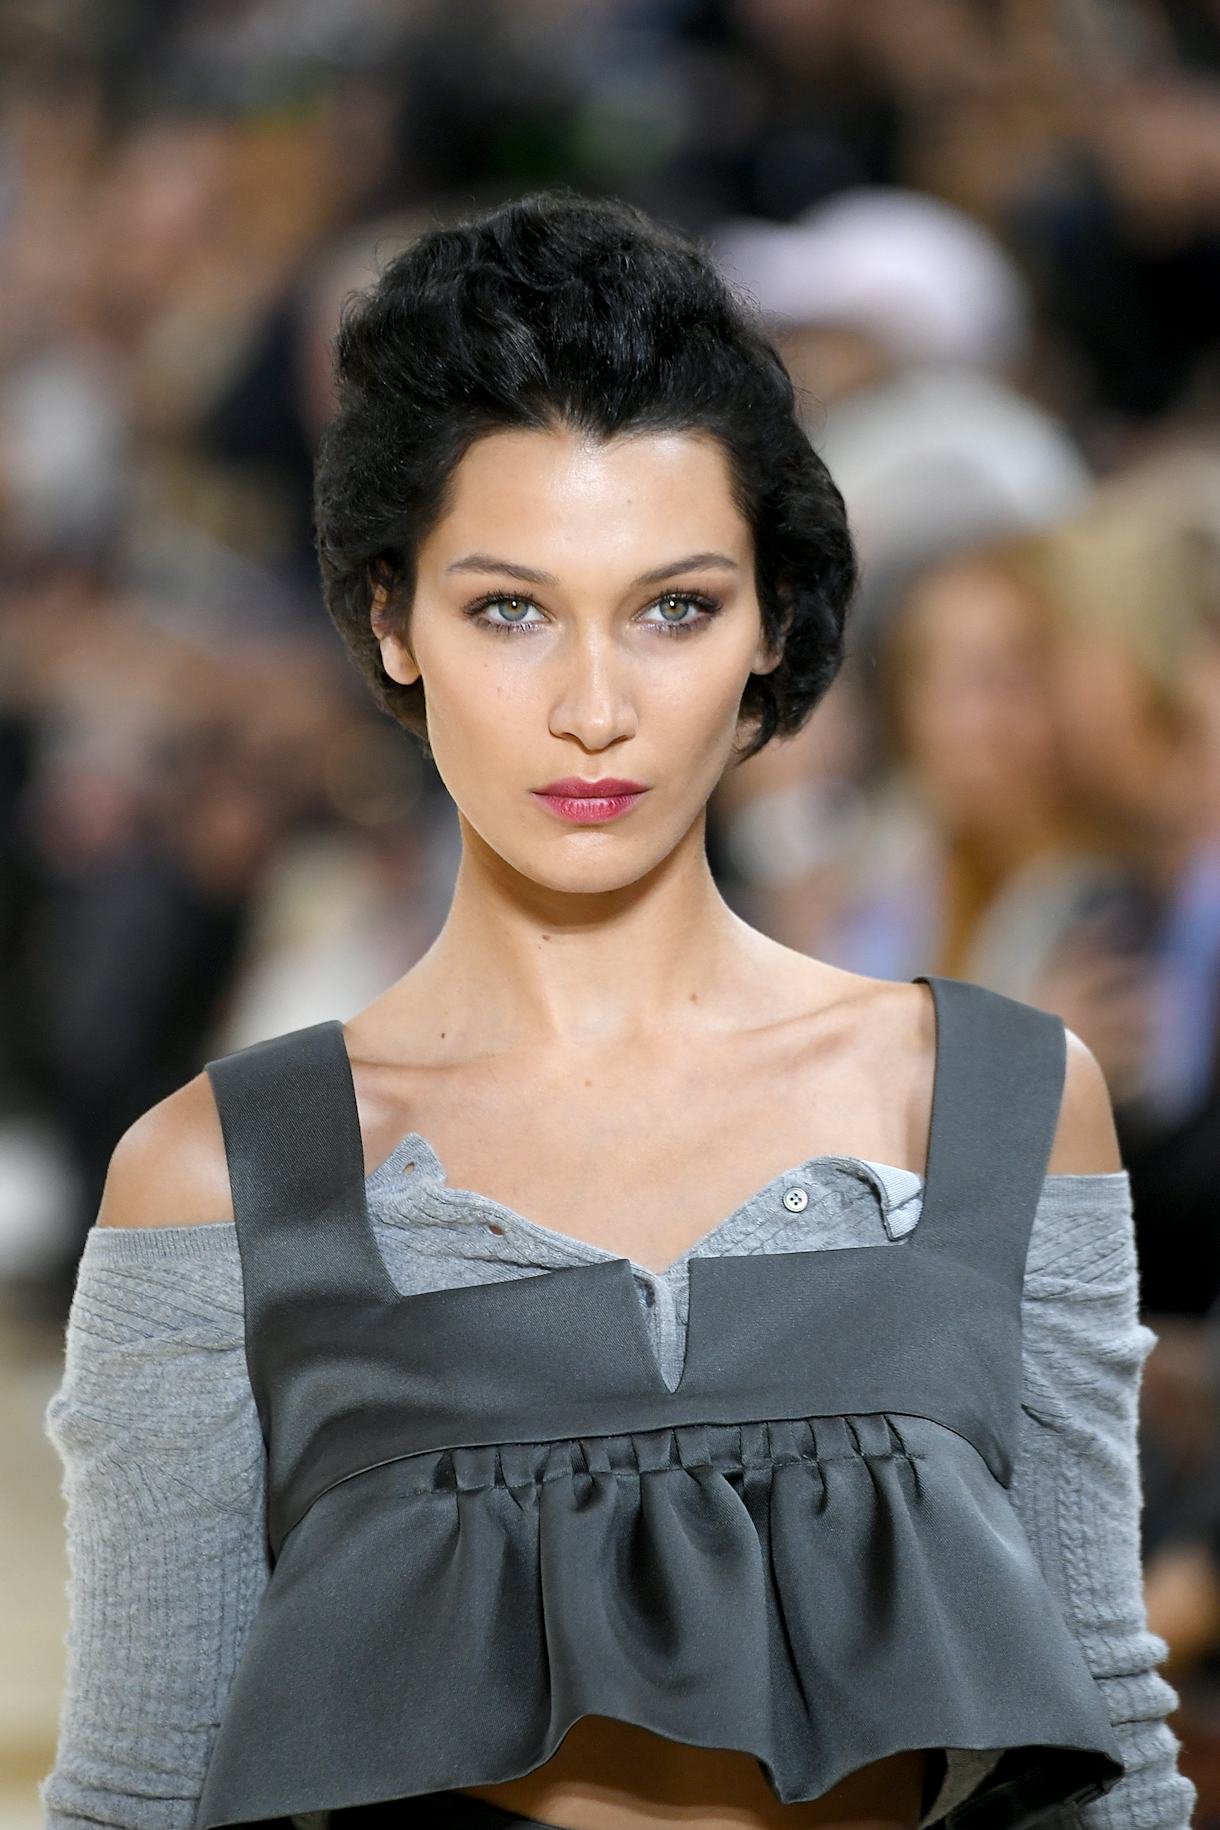 Bella Hadid's New Black Hair Is A Drastic Change For Her